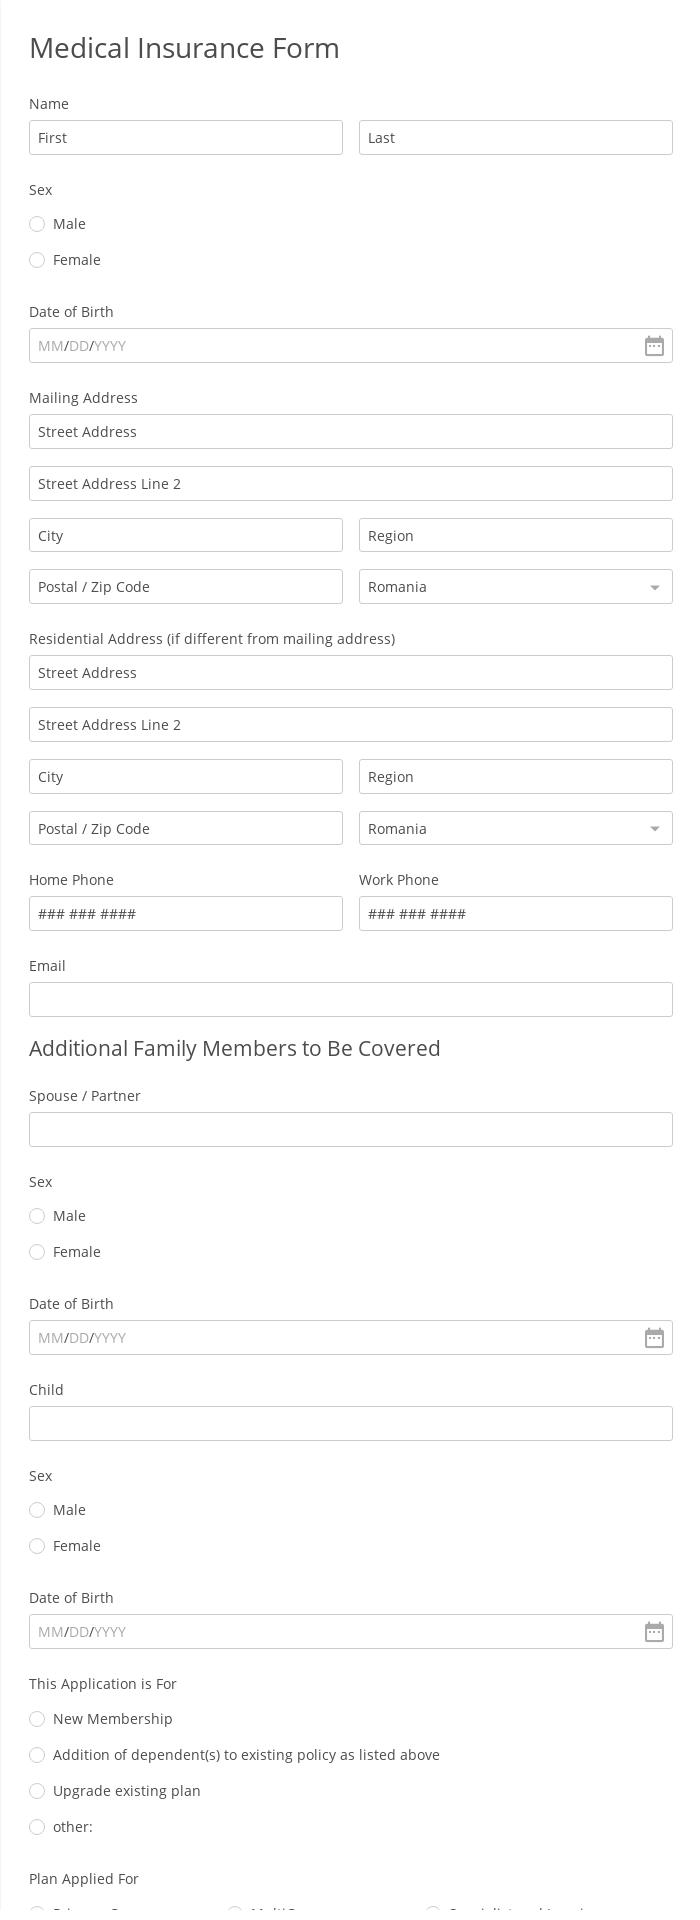 Insurance Form Templates For Online Use 123 Form Builder Medical insurance verification form template